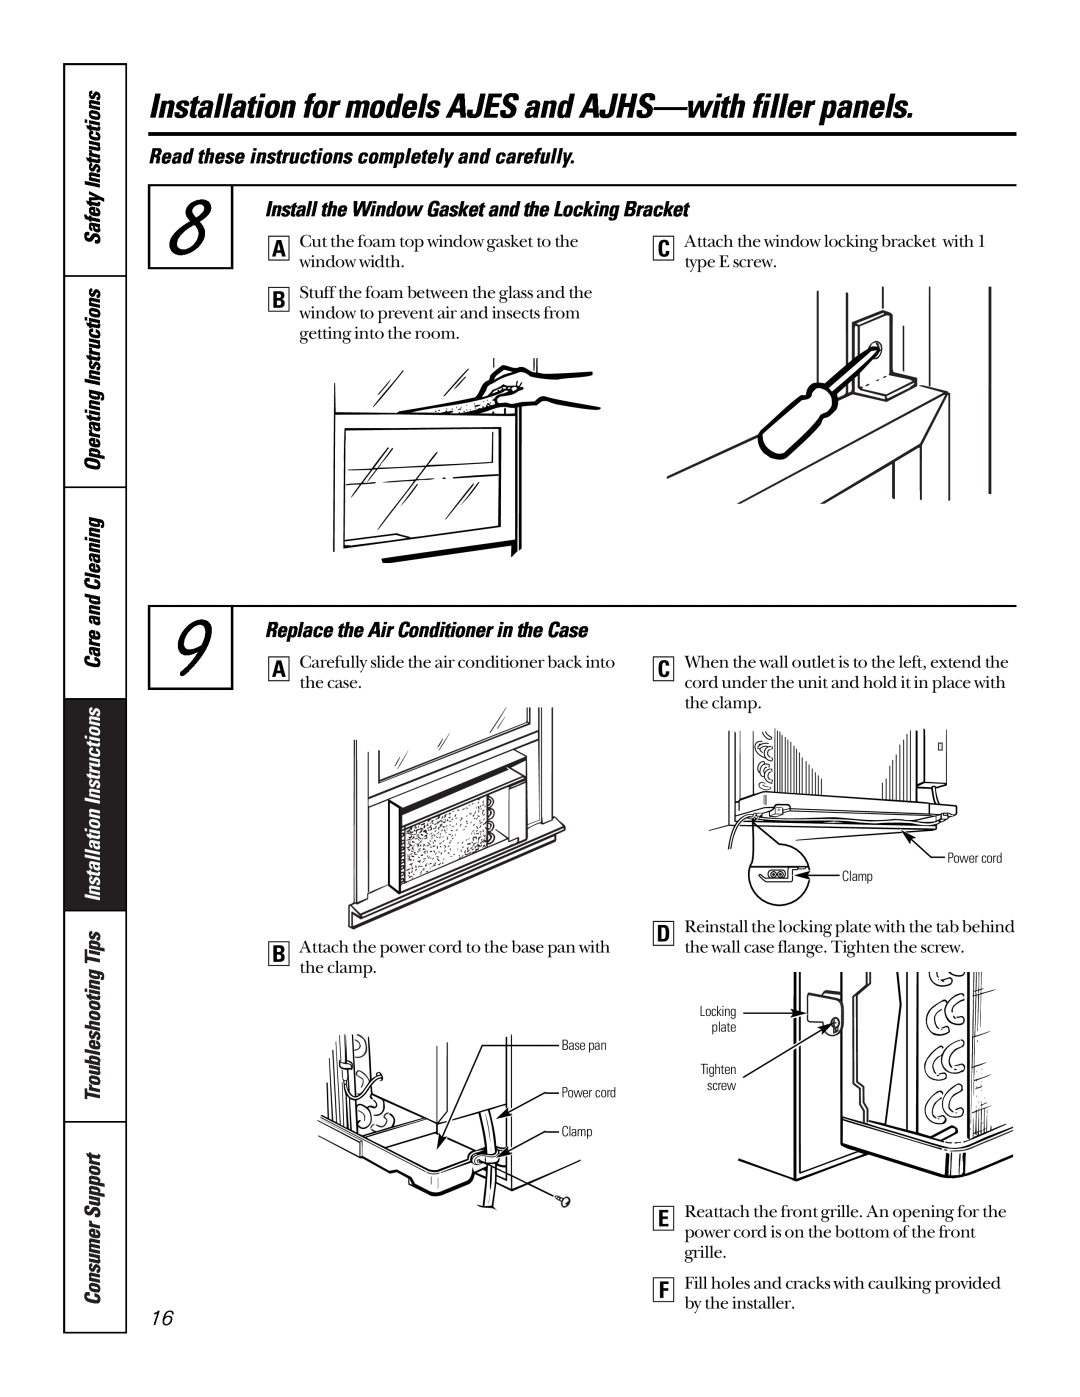 GE 10 AZA owner manual Install the Window Gasket and the Locking Bracket, Read these instructions completely and carefully 